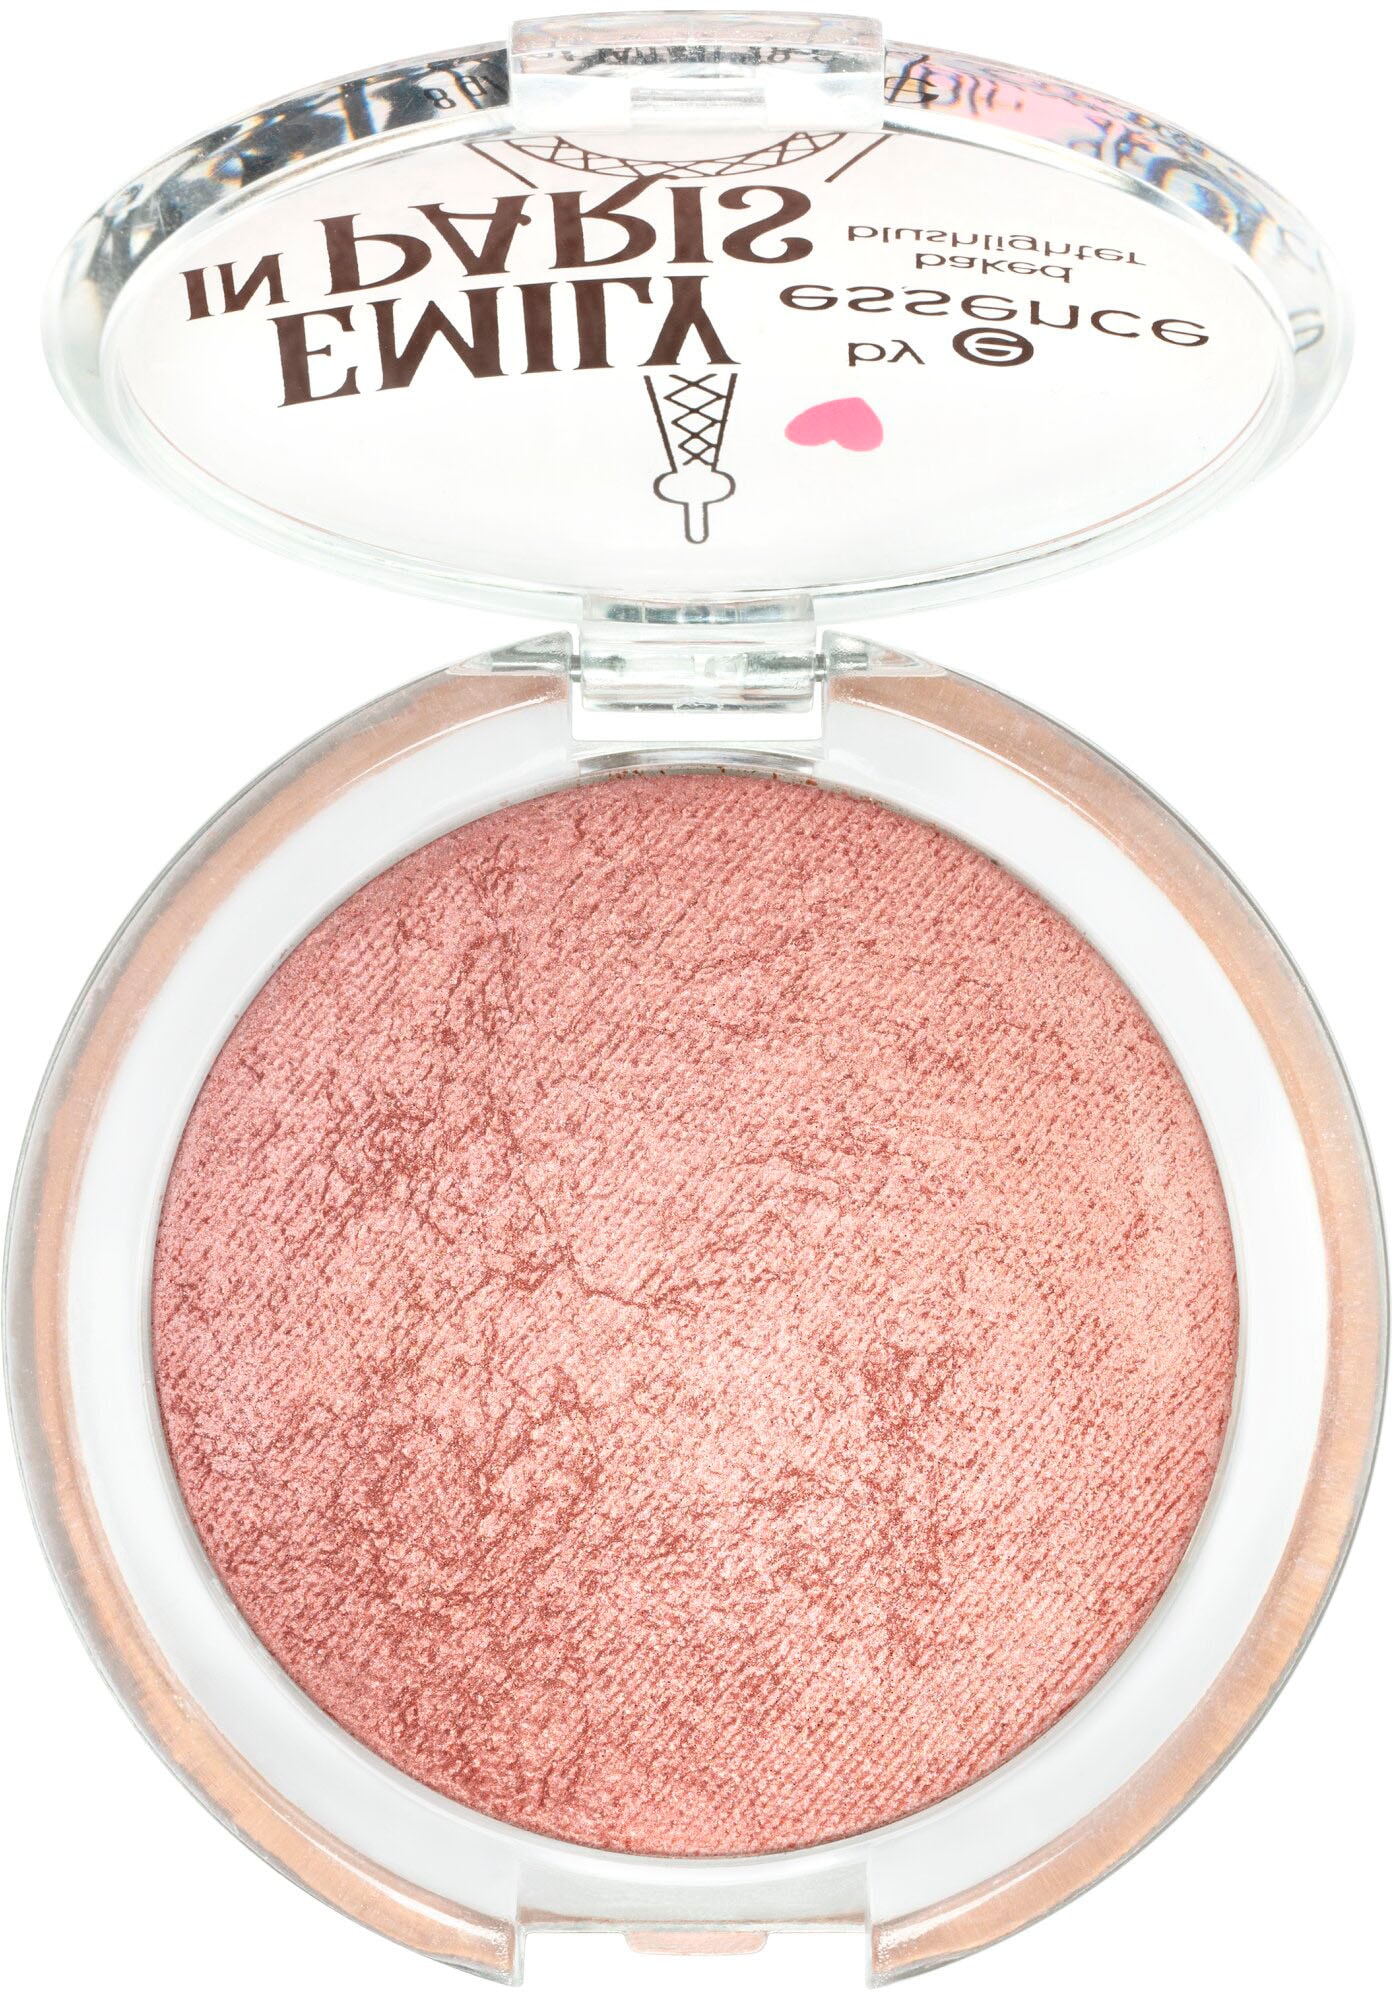 »EMILY baked Rouge IN online Essence essence blushlighter« bei by PARIS